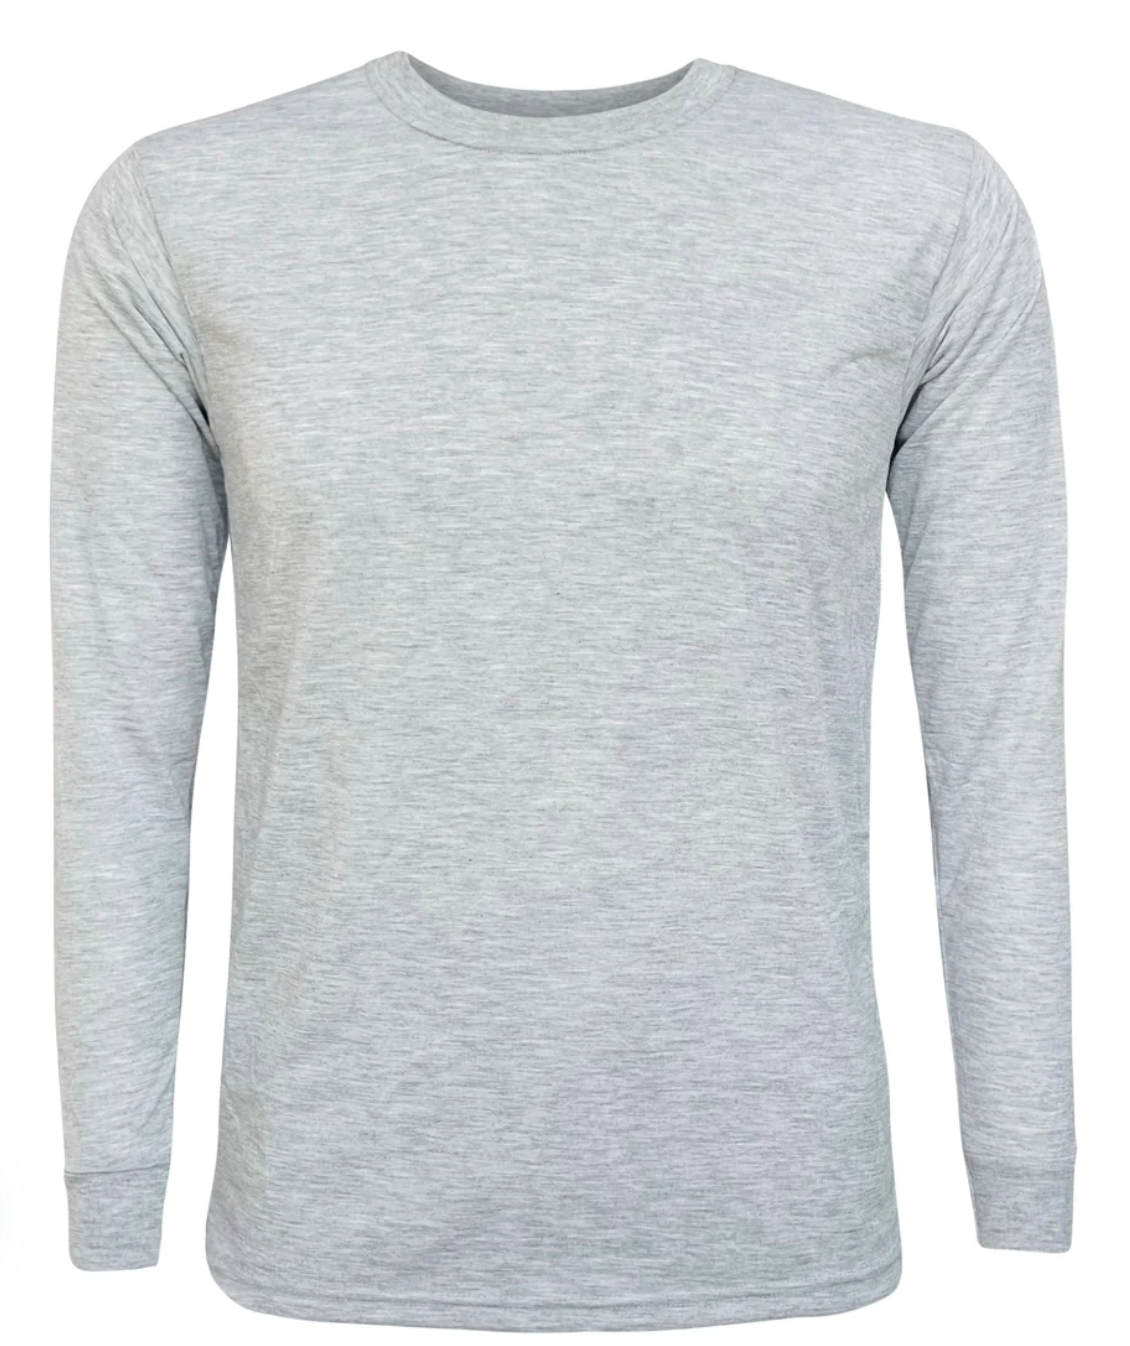 100% Polyester Adult Unisex Long Sleeve Shirt- Perfect for Sublimation